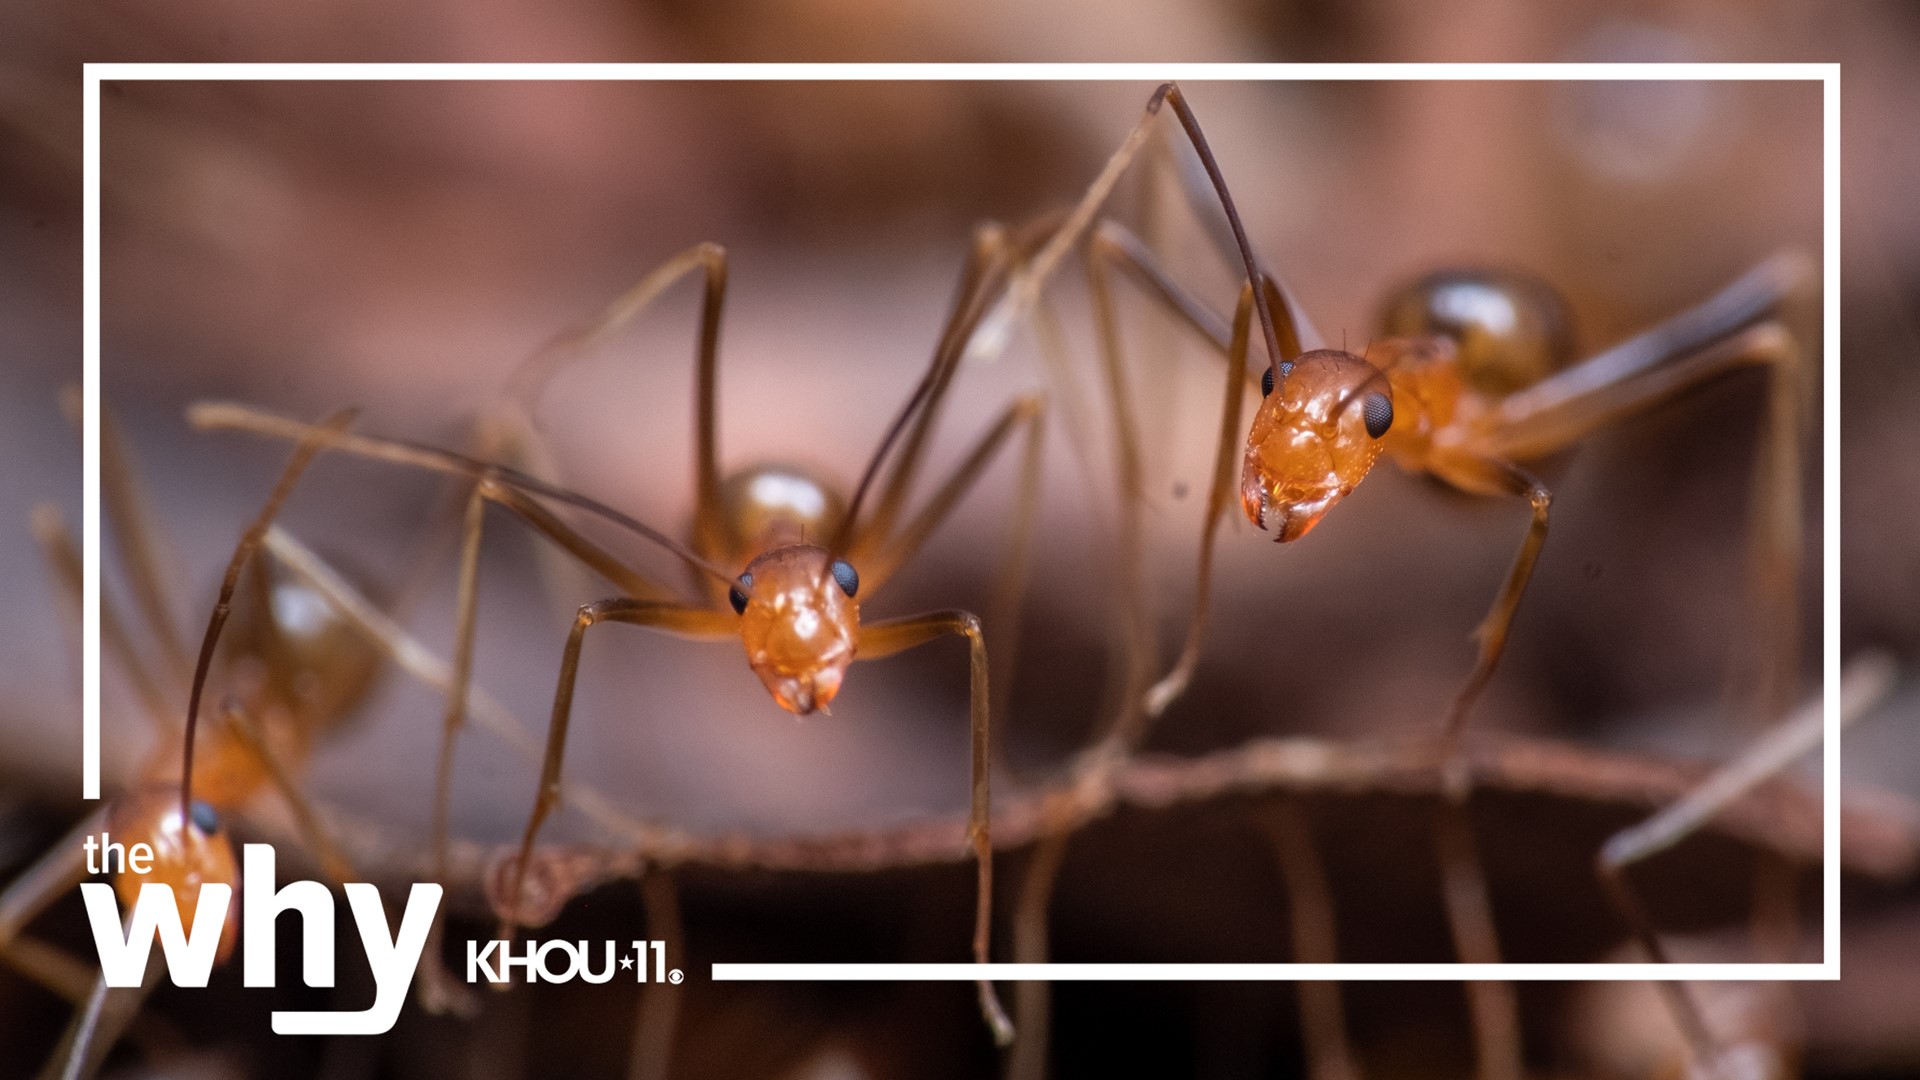 Crazy ants are an invasive species known for going after electronics.